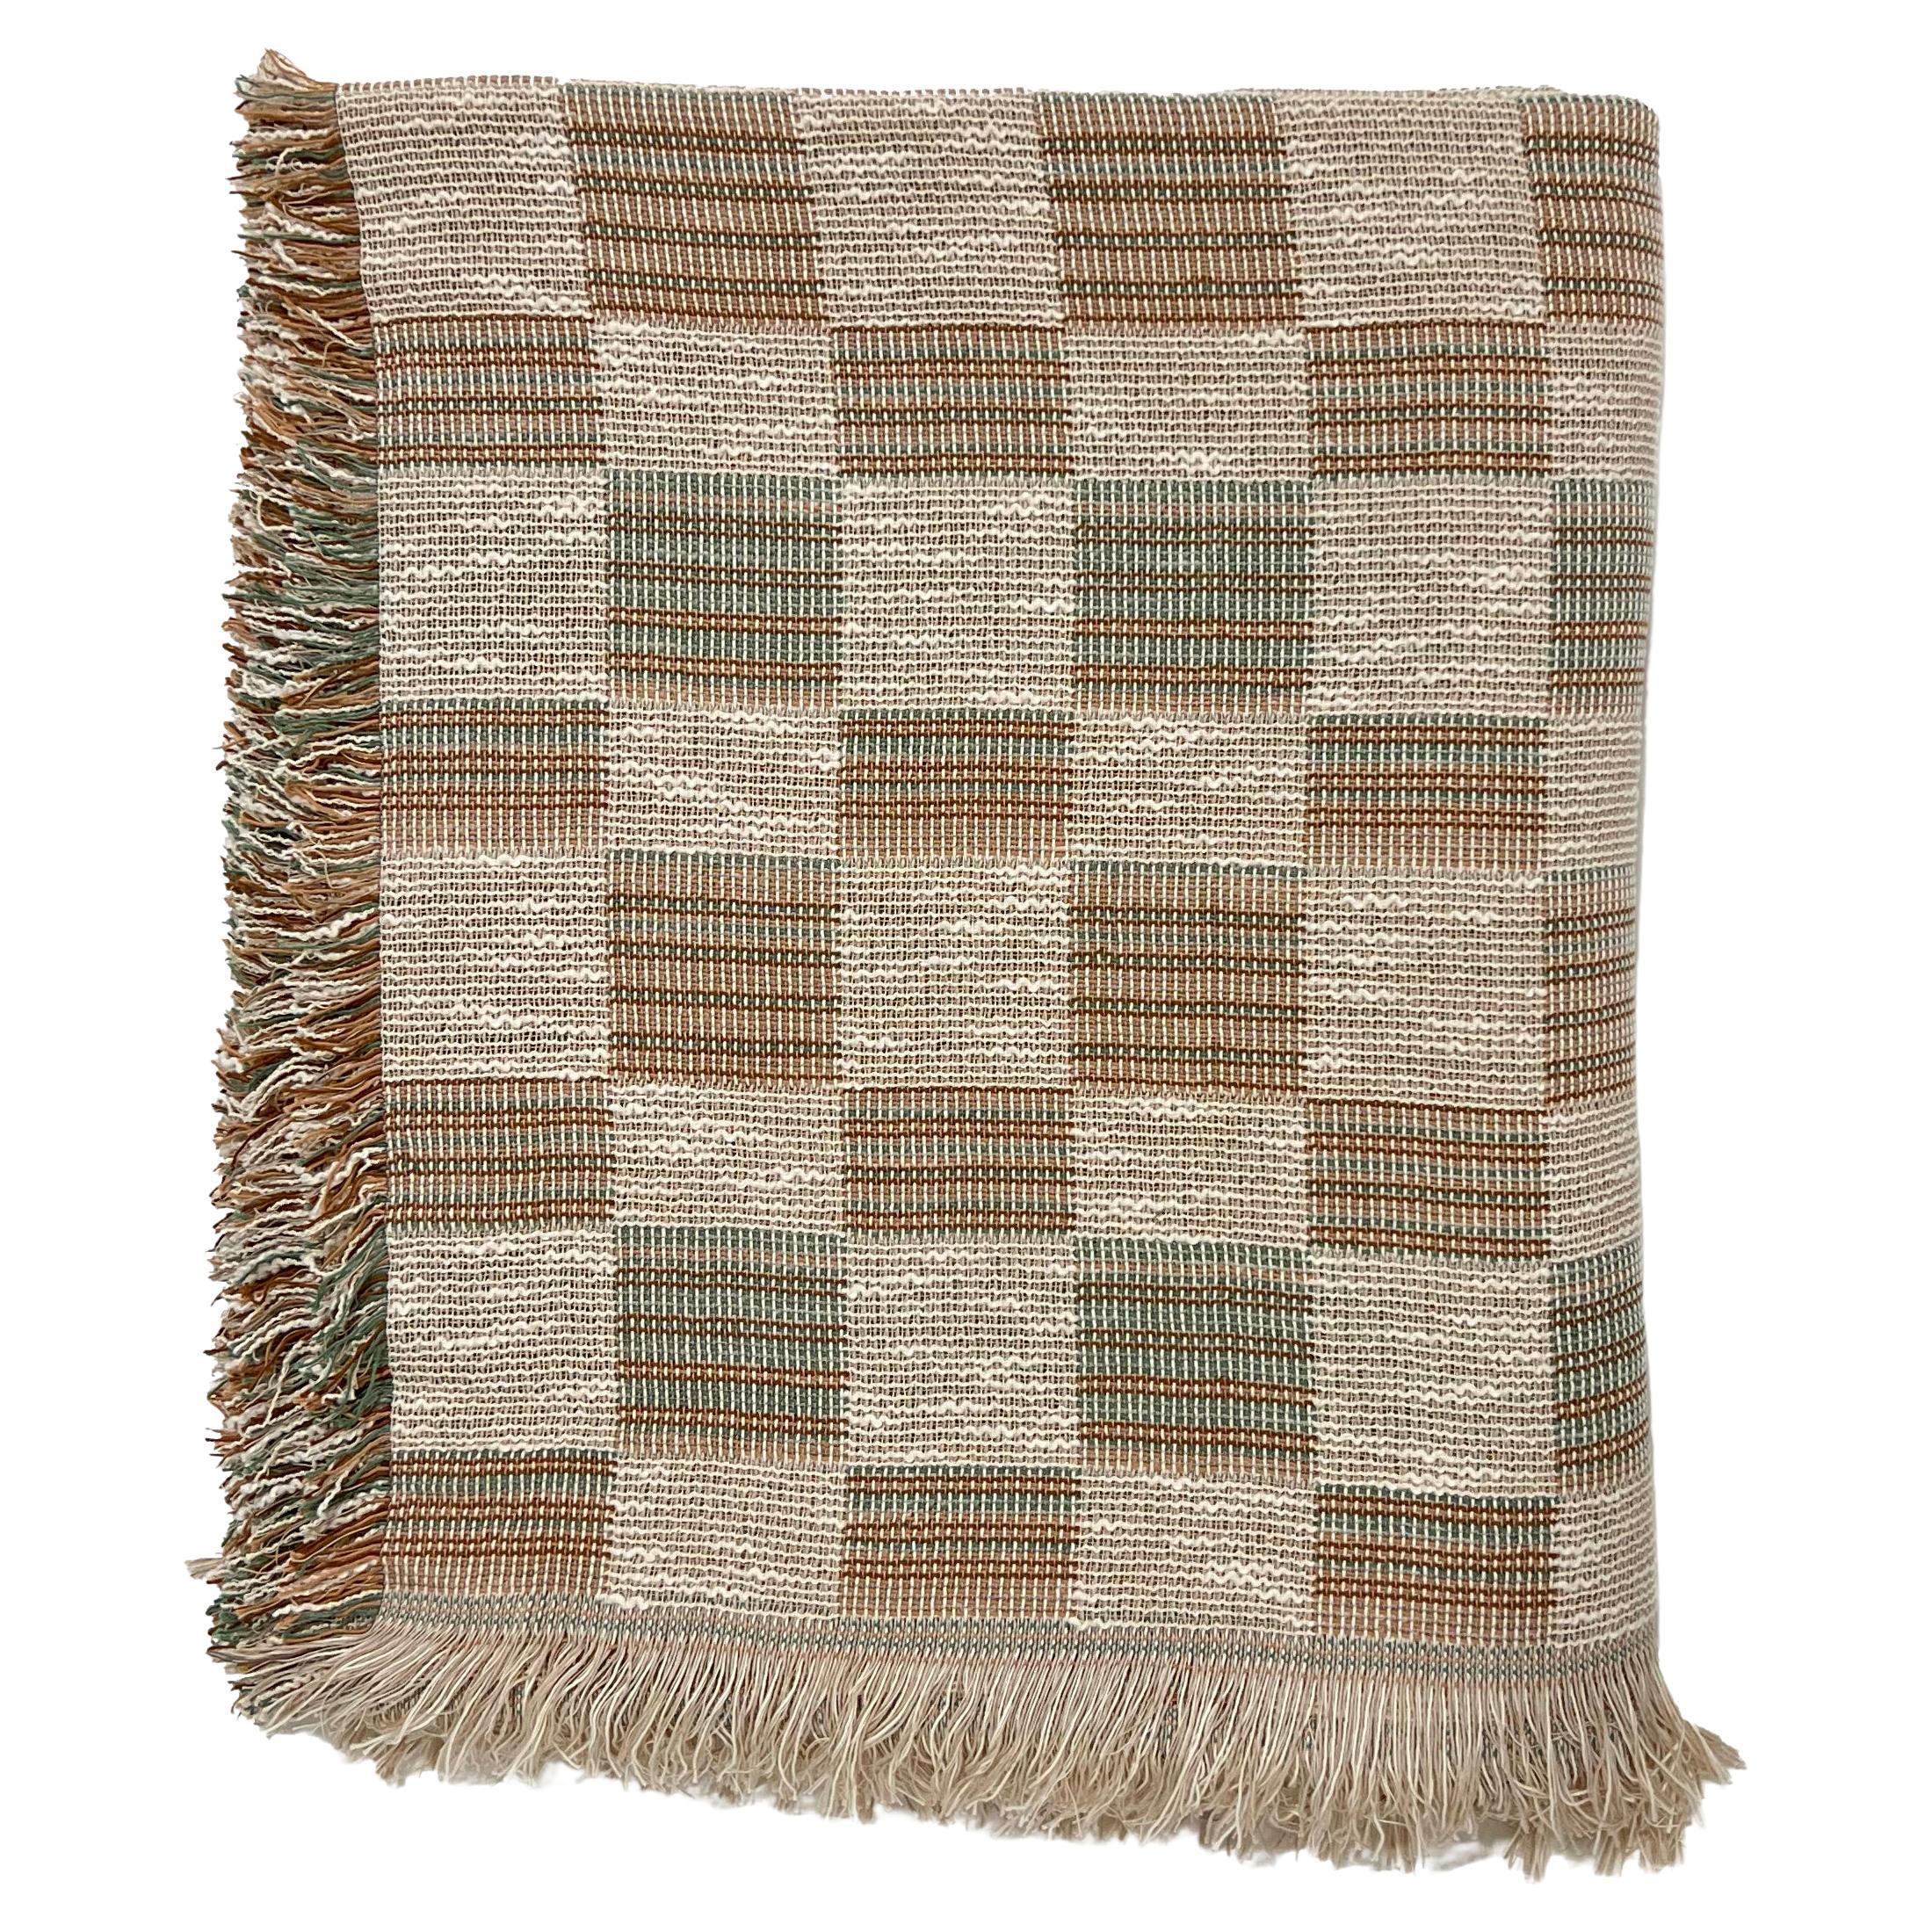 Patterned Woven Cotton Throw Blanket by Folk Textiles (Mariana / Sea)